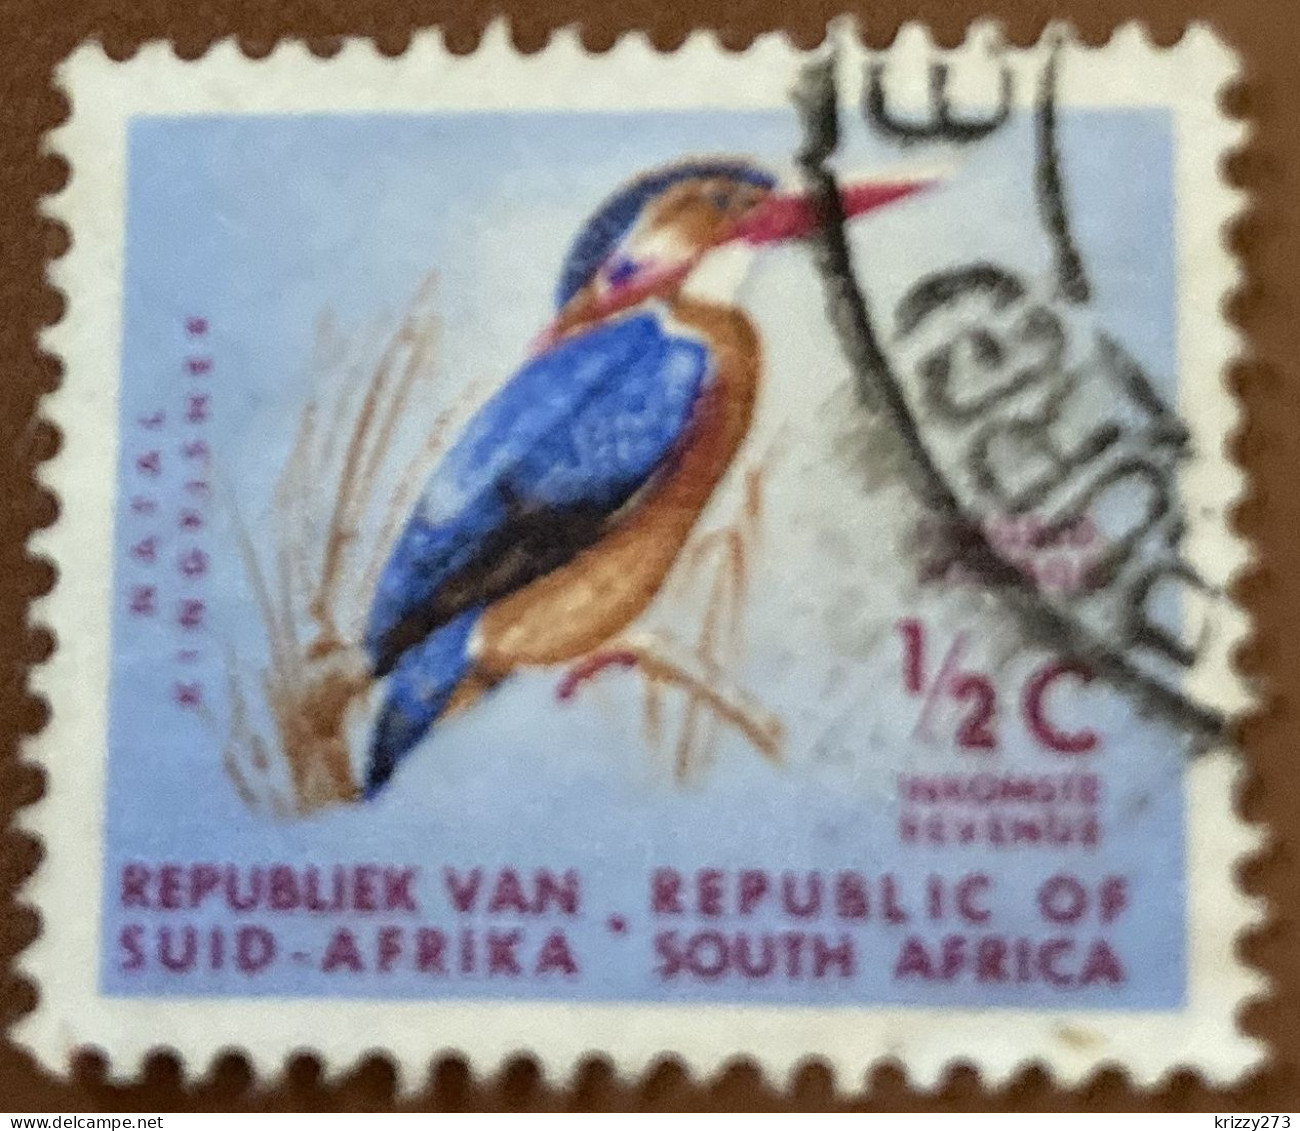 South Africa 1961 Animal Ispidina Picta ½ C - Used - Oblitérés